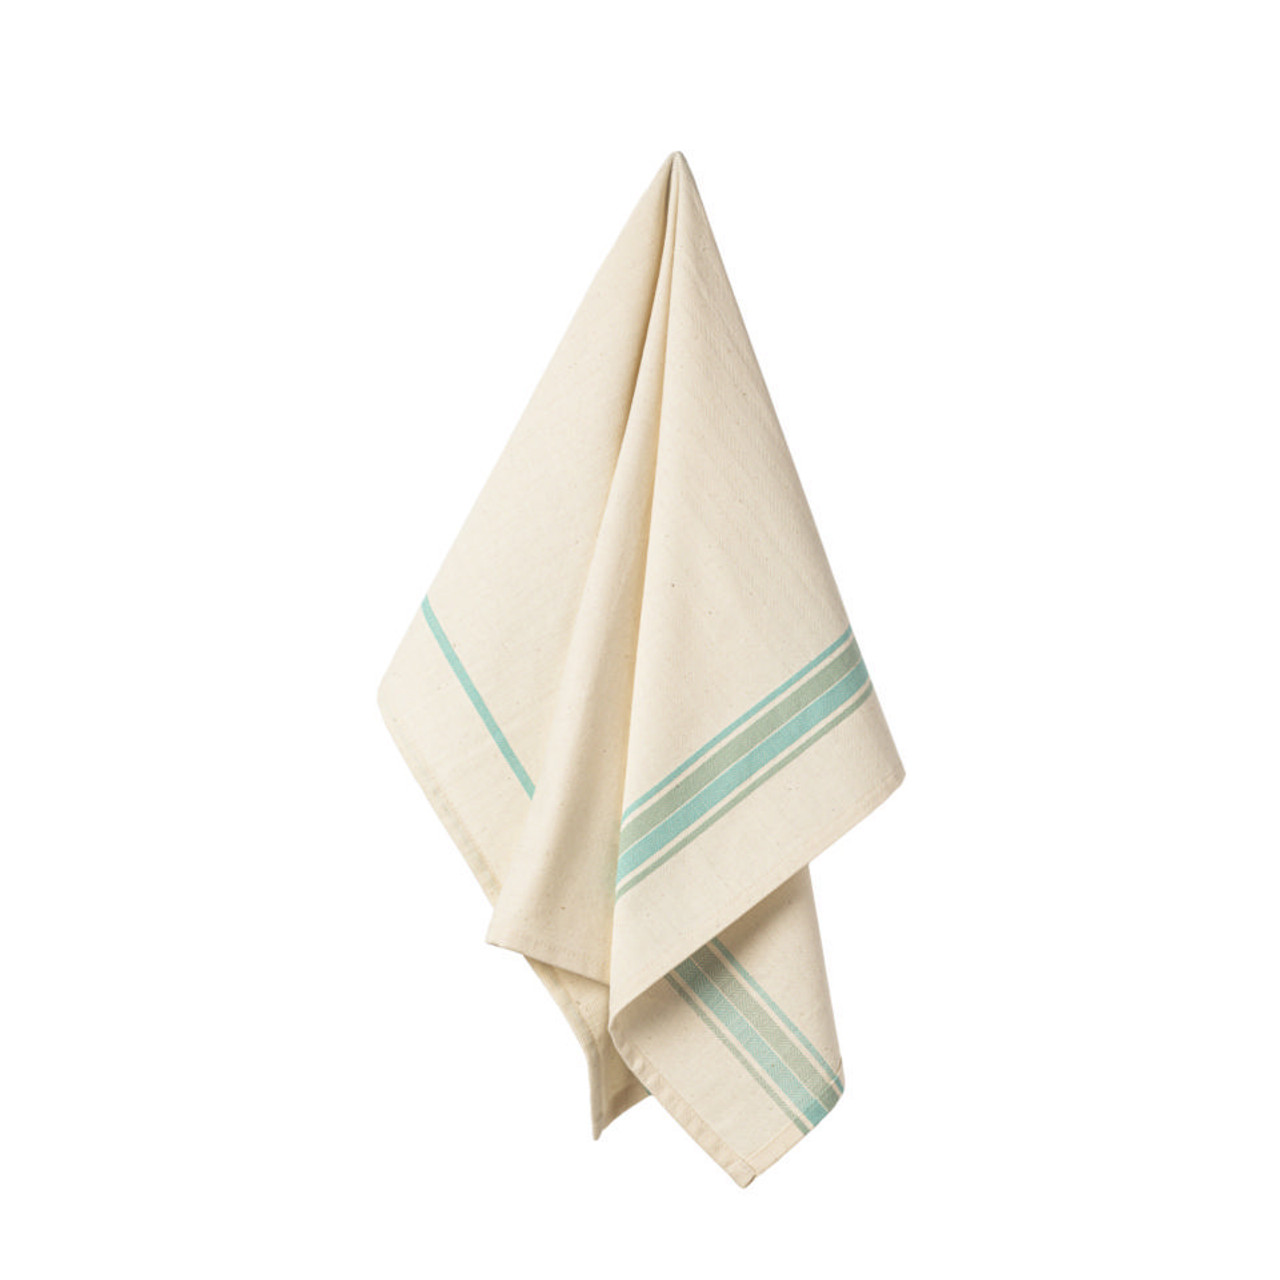 https://cdn11.bigcommerce.com/s-e0xlh4avpe/images/stencil/1280x1280/products/85121/111400/casafina-set-of-2-kitchen-towels-aqua-french-stripes-8__17455.1650920197.jpg?c=1